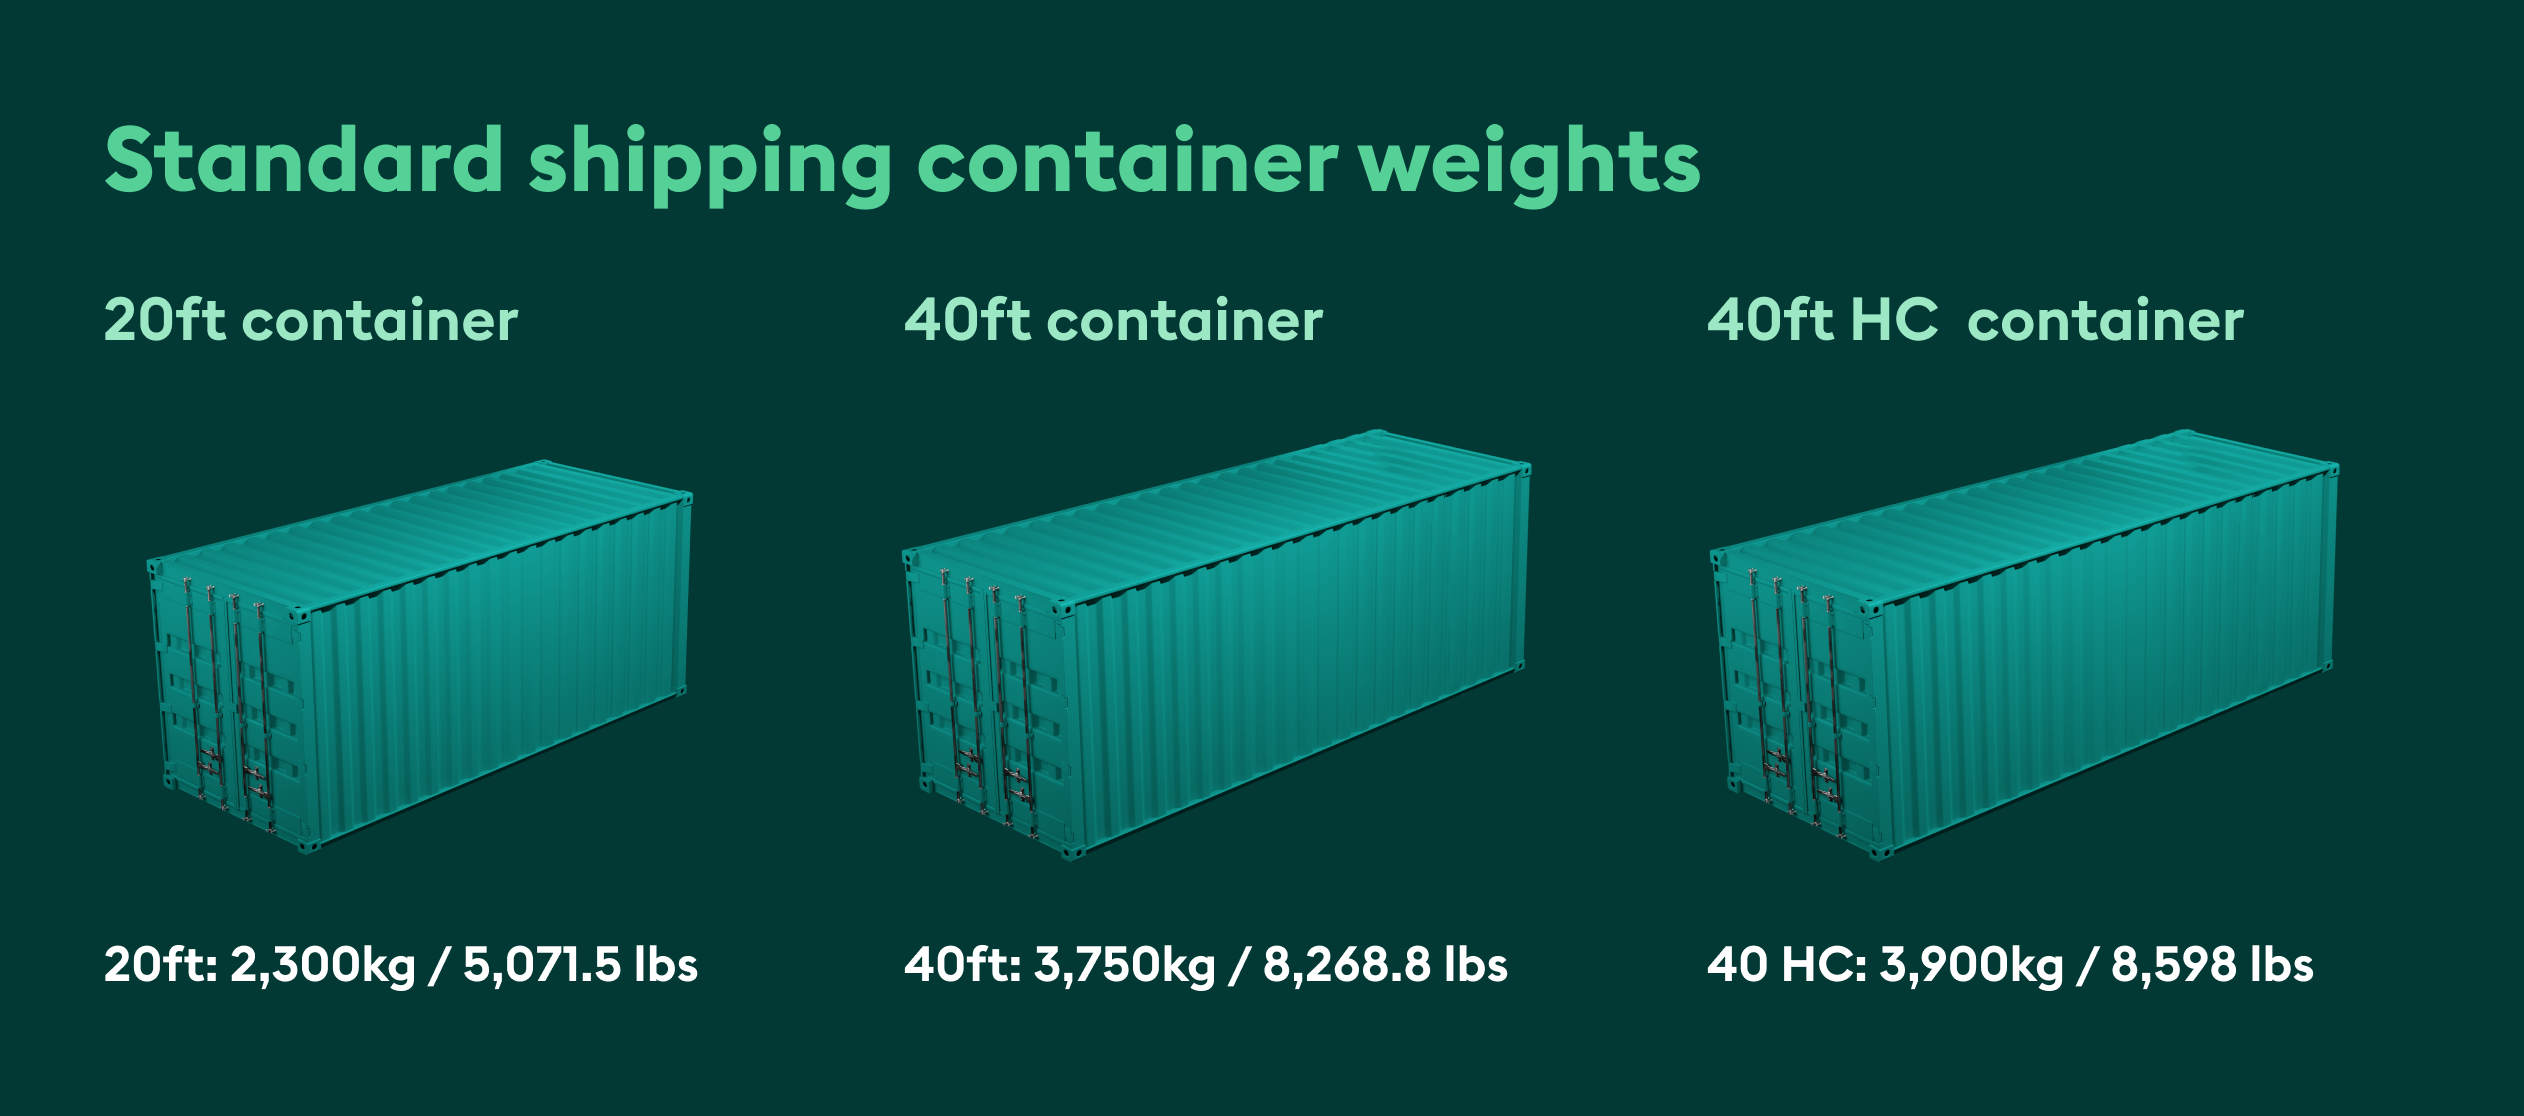 Container weights